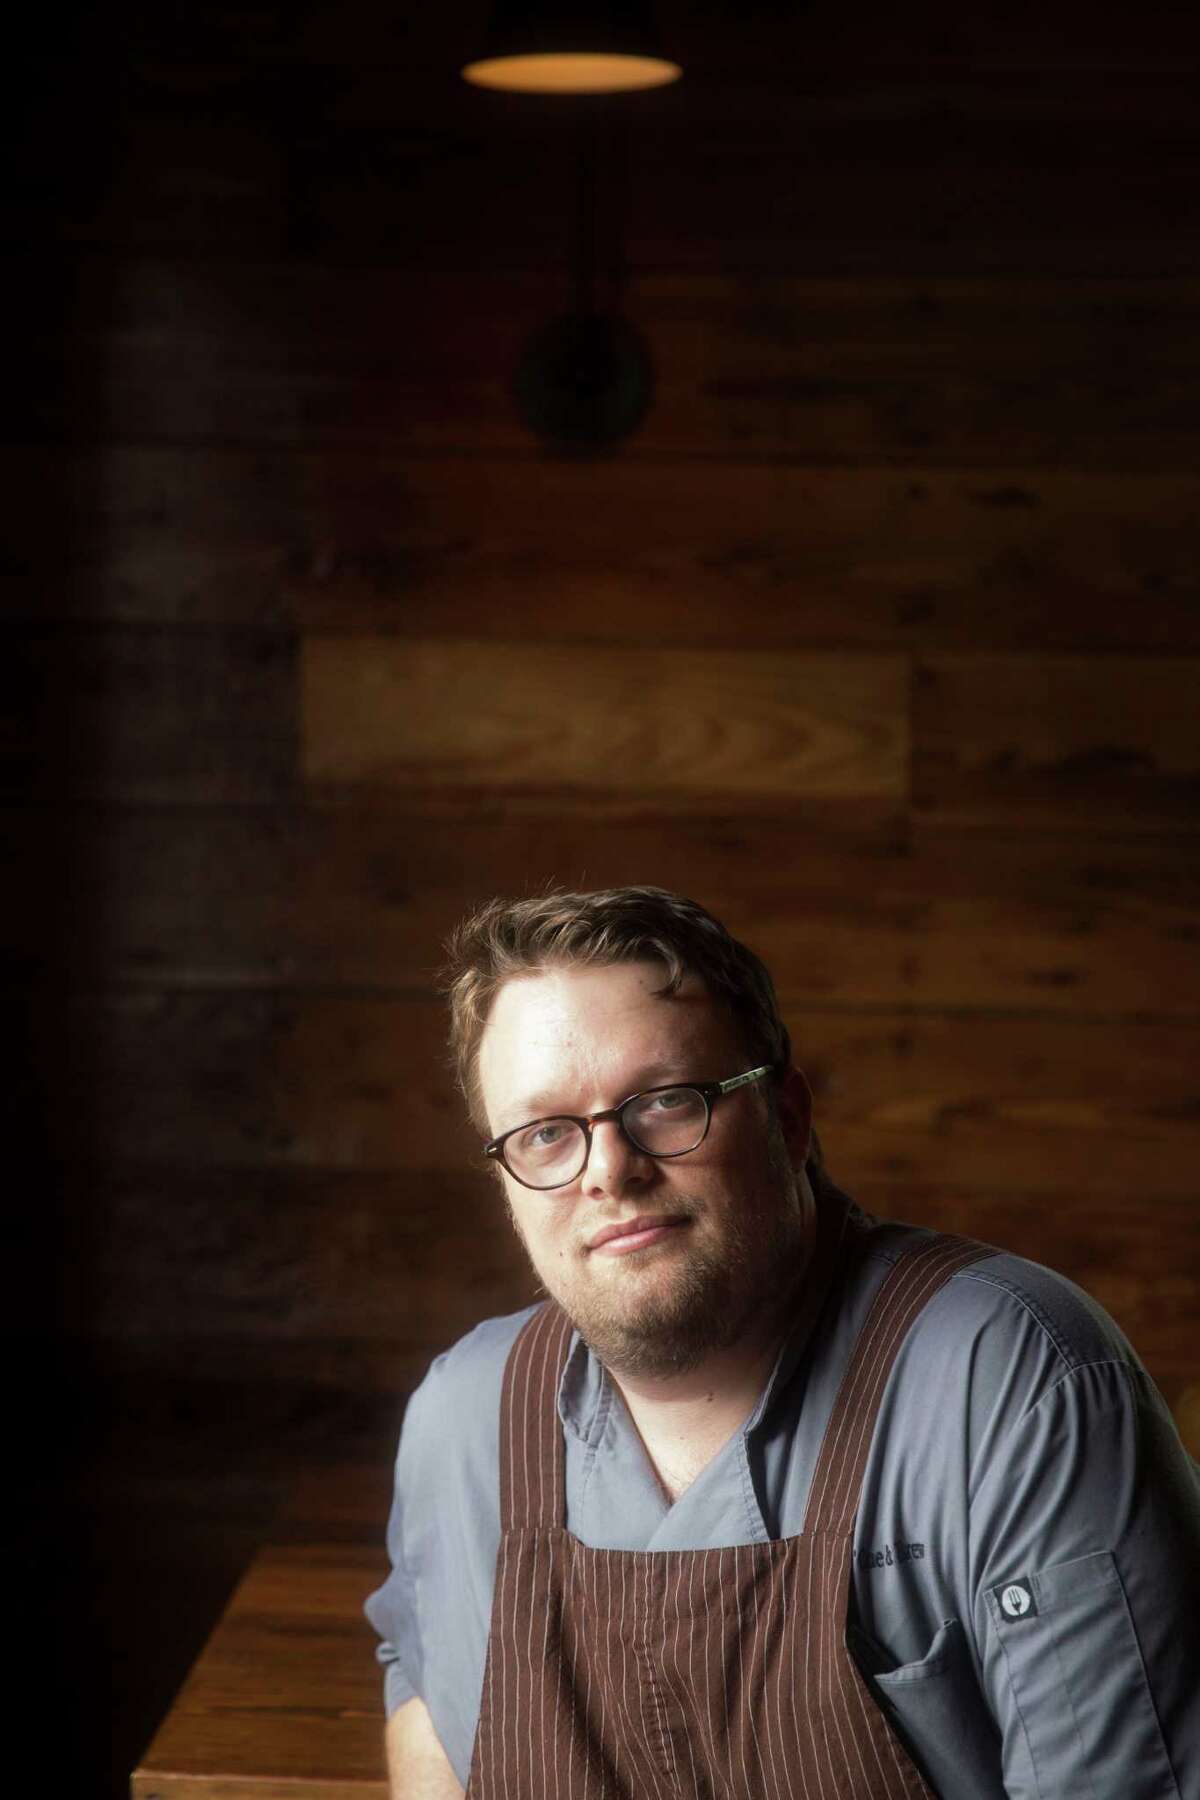 Chef and Co-Owner Tim Rattray poses for a portrait at The Granary in San Antonio, TX on Tuesday, April 14, 2015.